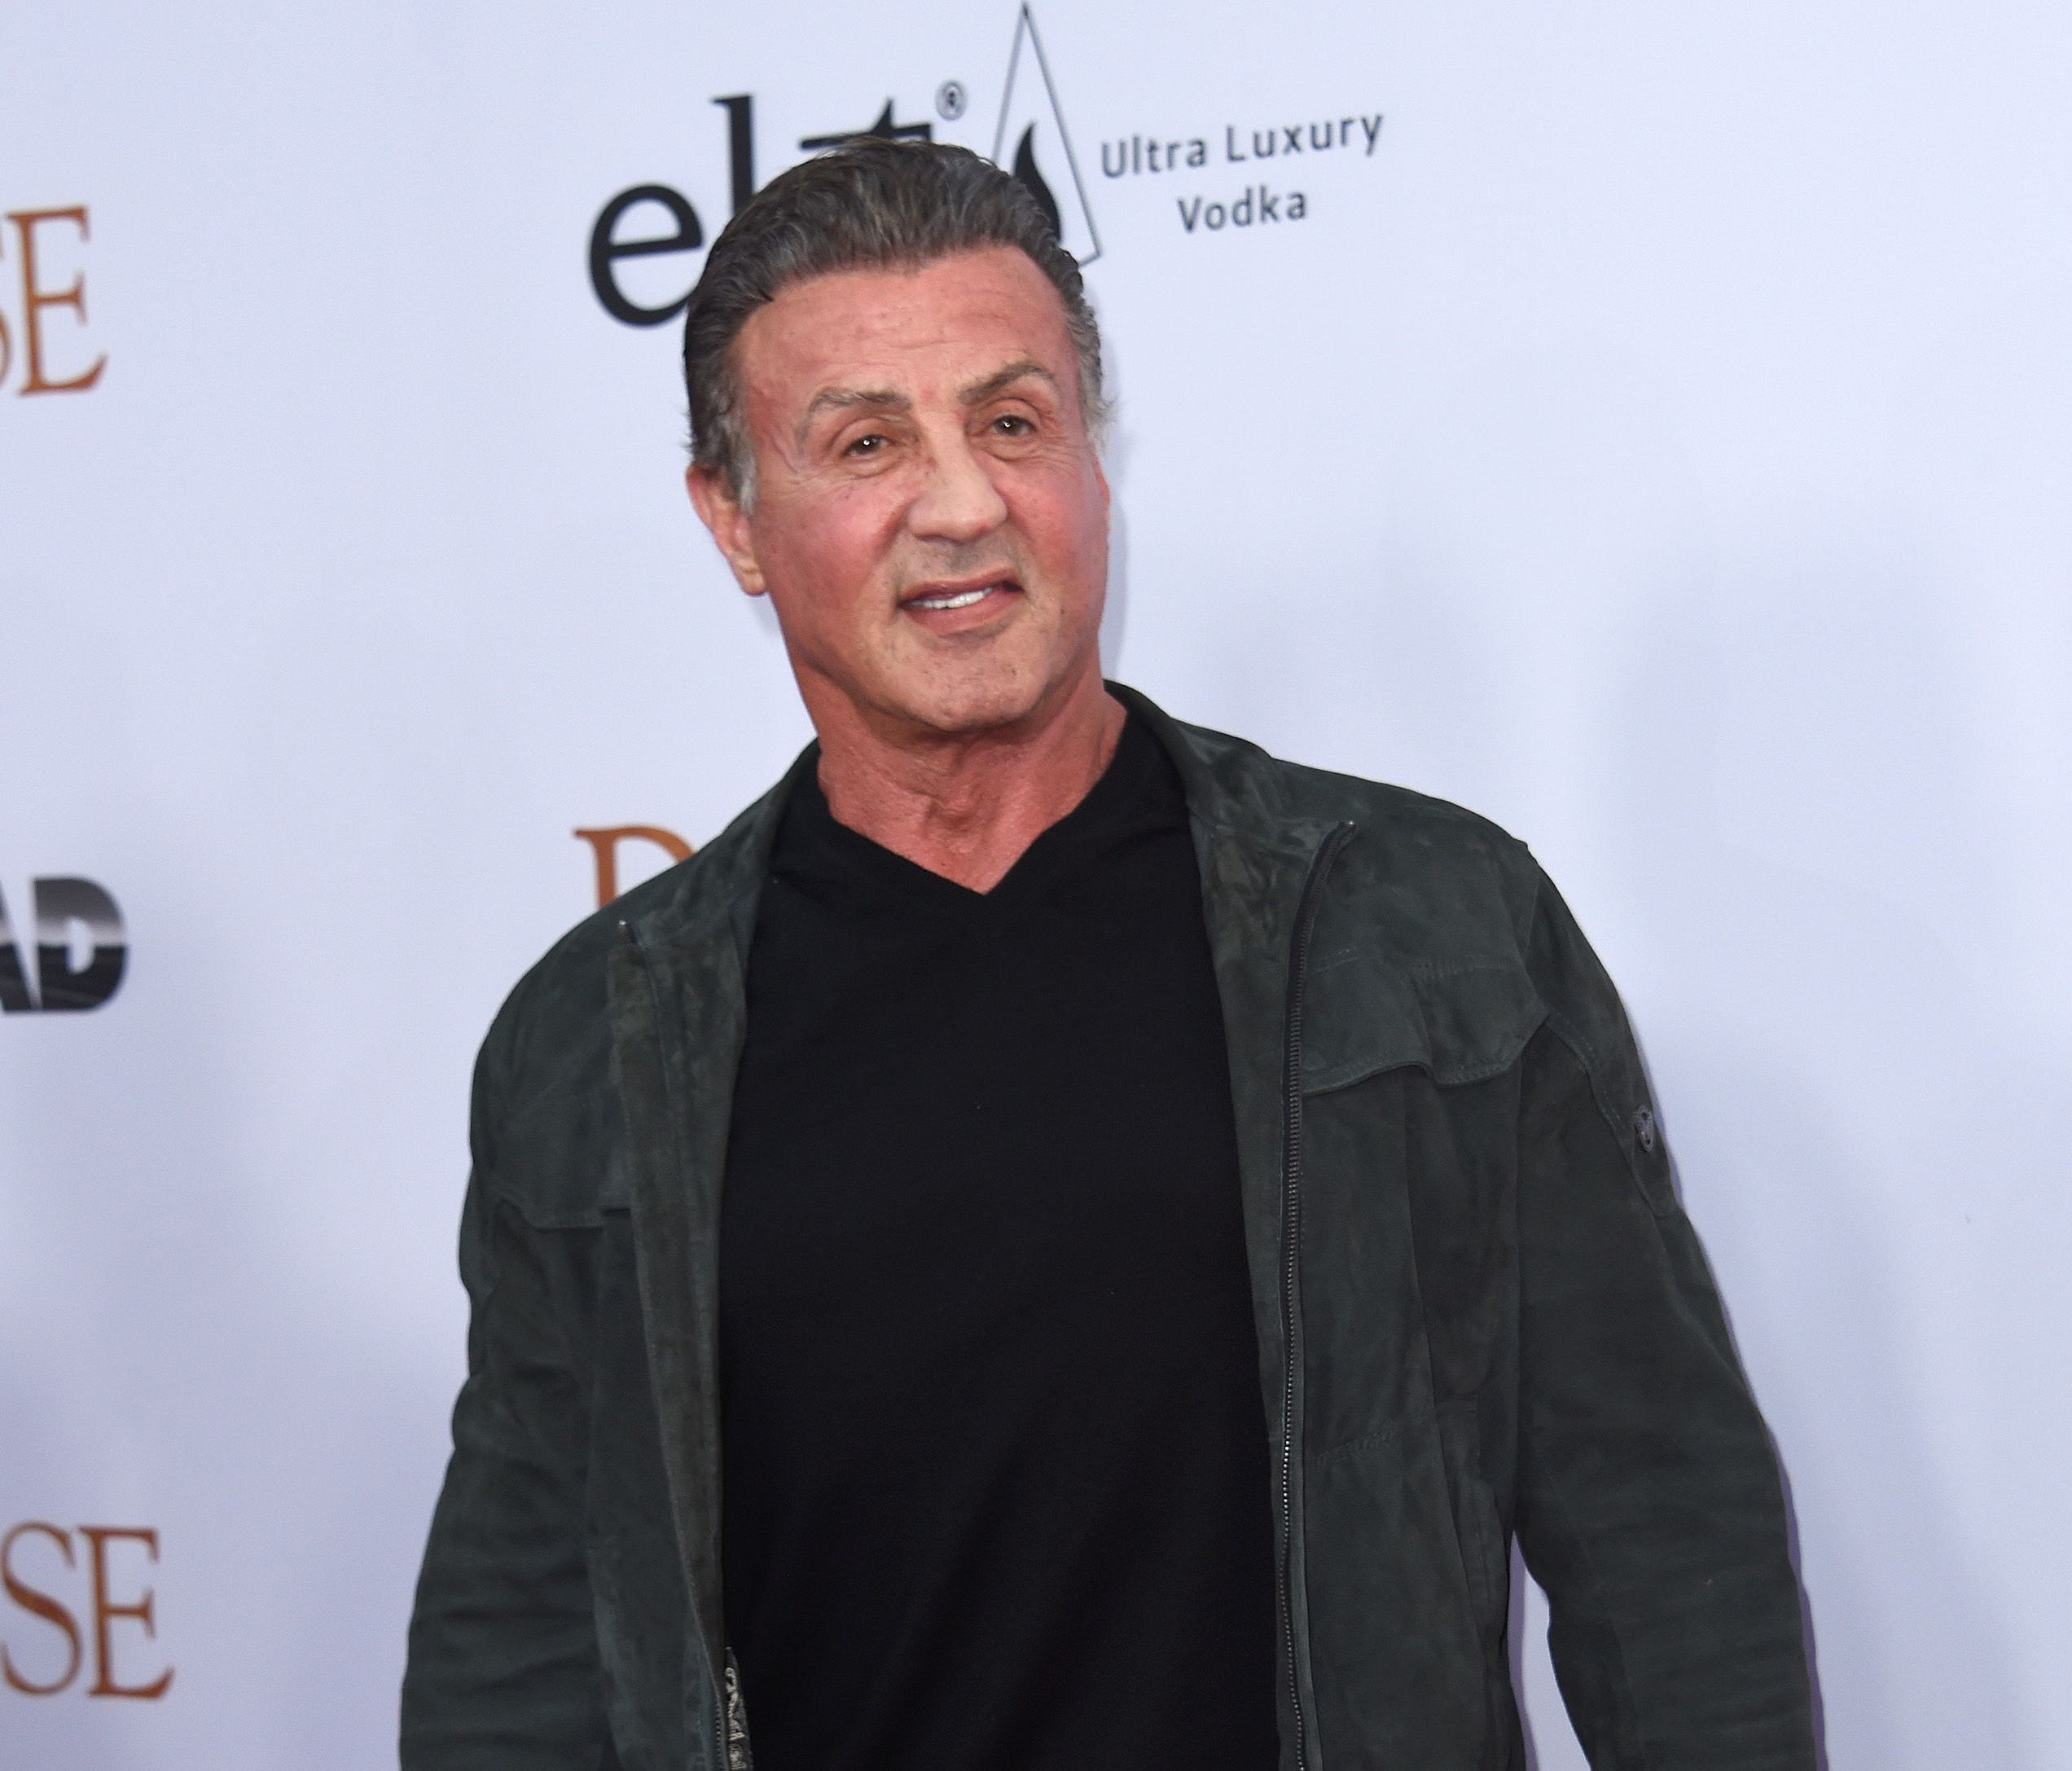 Sylvester Stallone and his attorney plan to file a complaint against a woman  they say filed a false police report accusing the actor of raping her in 1990.